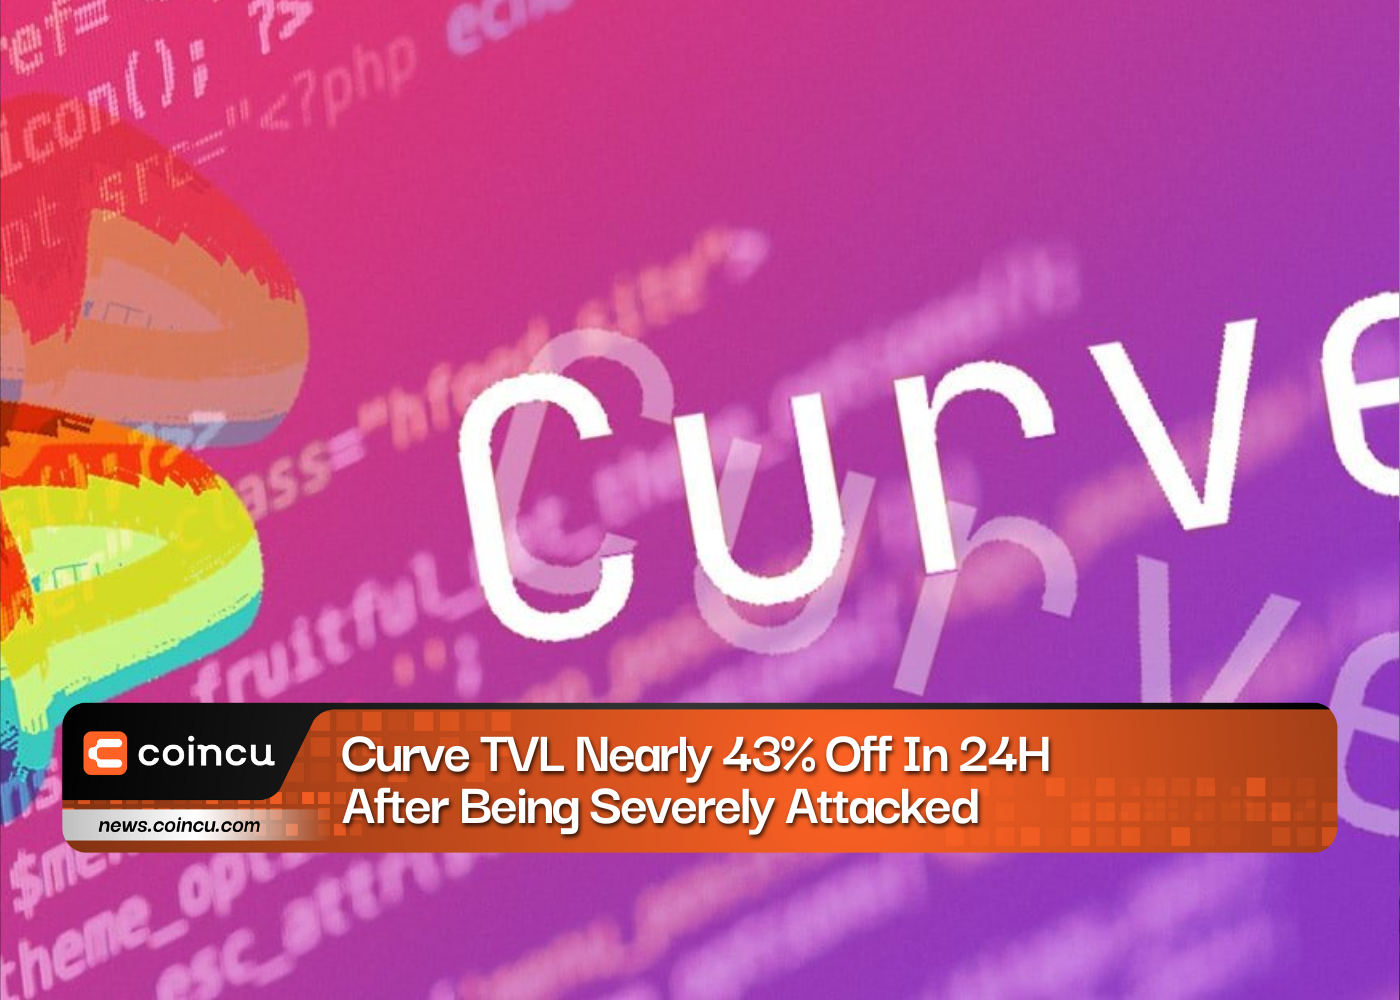 Curve TVL Nearly 43% Off In 24H After Being Severely Attacked